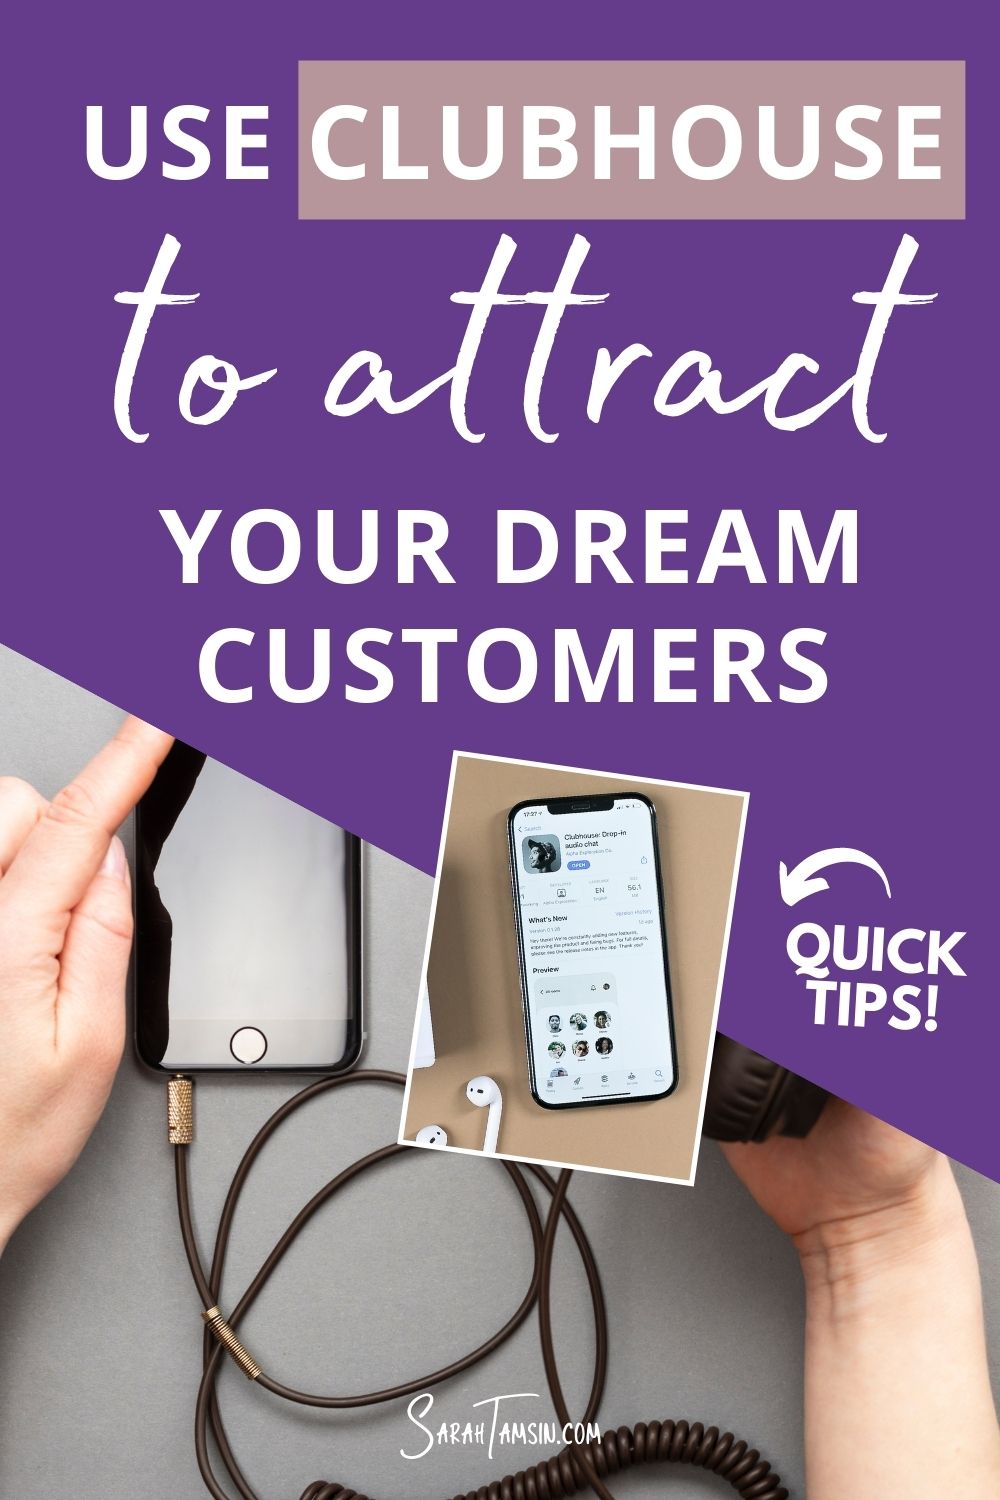 Use Clubhouse to attract your dream customers - quick tips